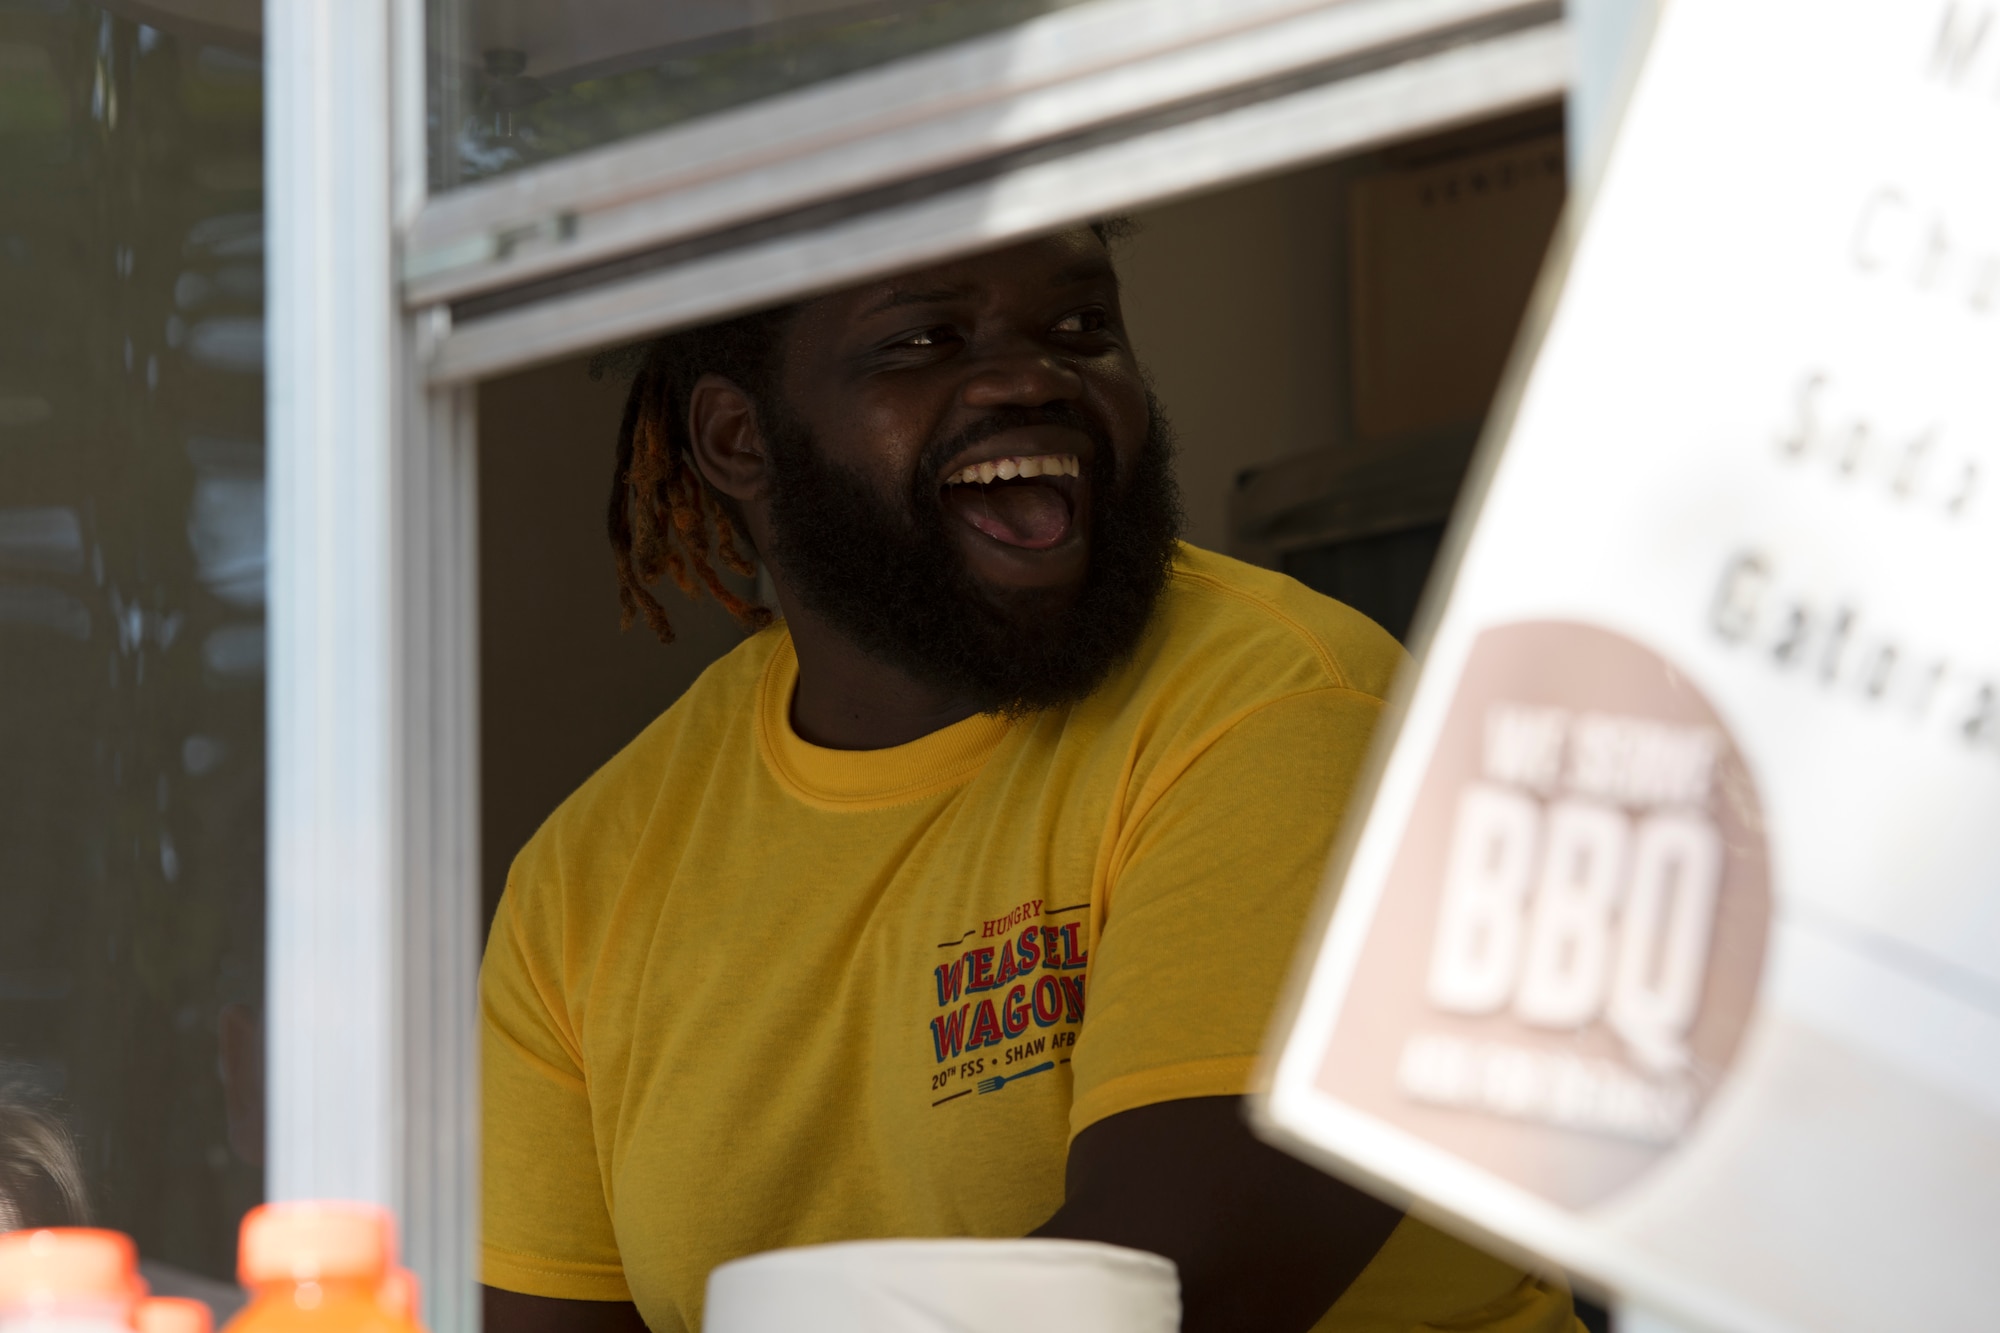 A 20th Force Support Squadron (FSS) food service employee laughs with a coworker in the Weasel Wagon during the 20th FSS Freedom Bash at Shaw Air Force Base, South Carolina, June 29, 2019.